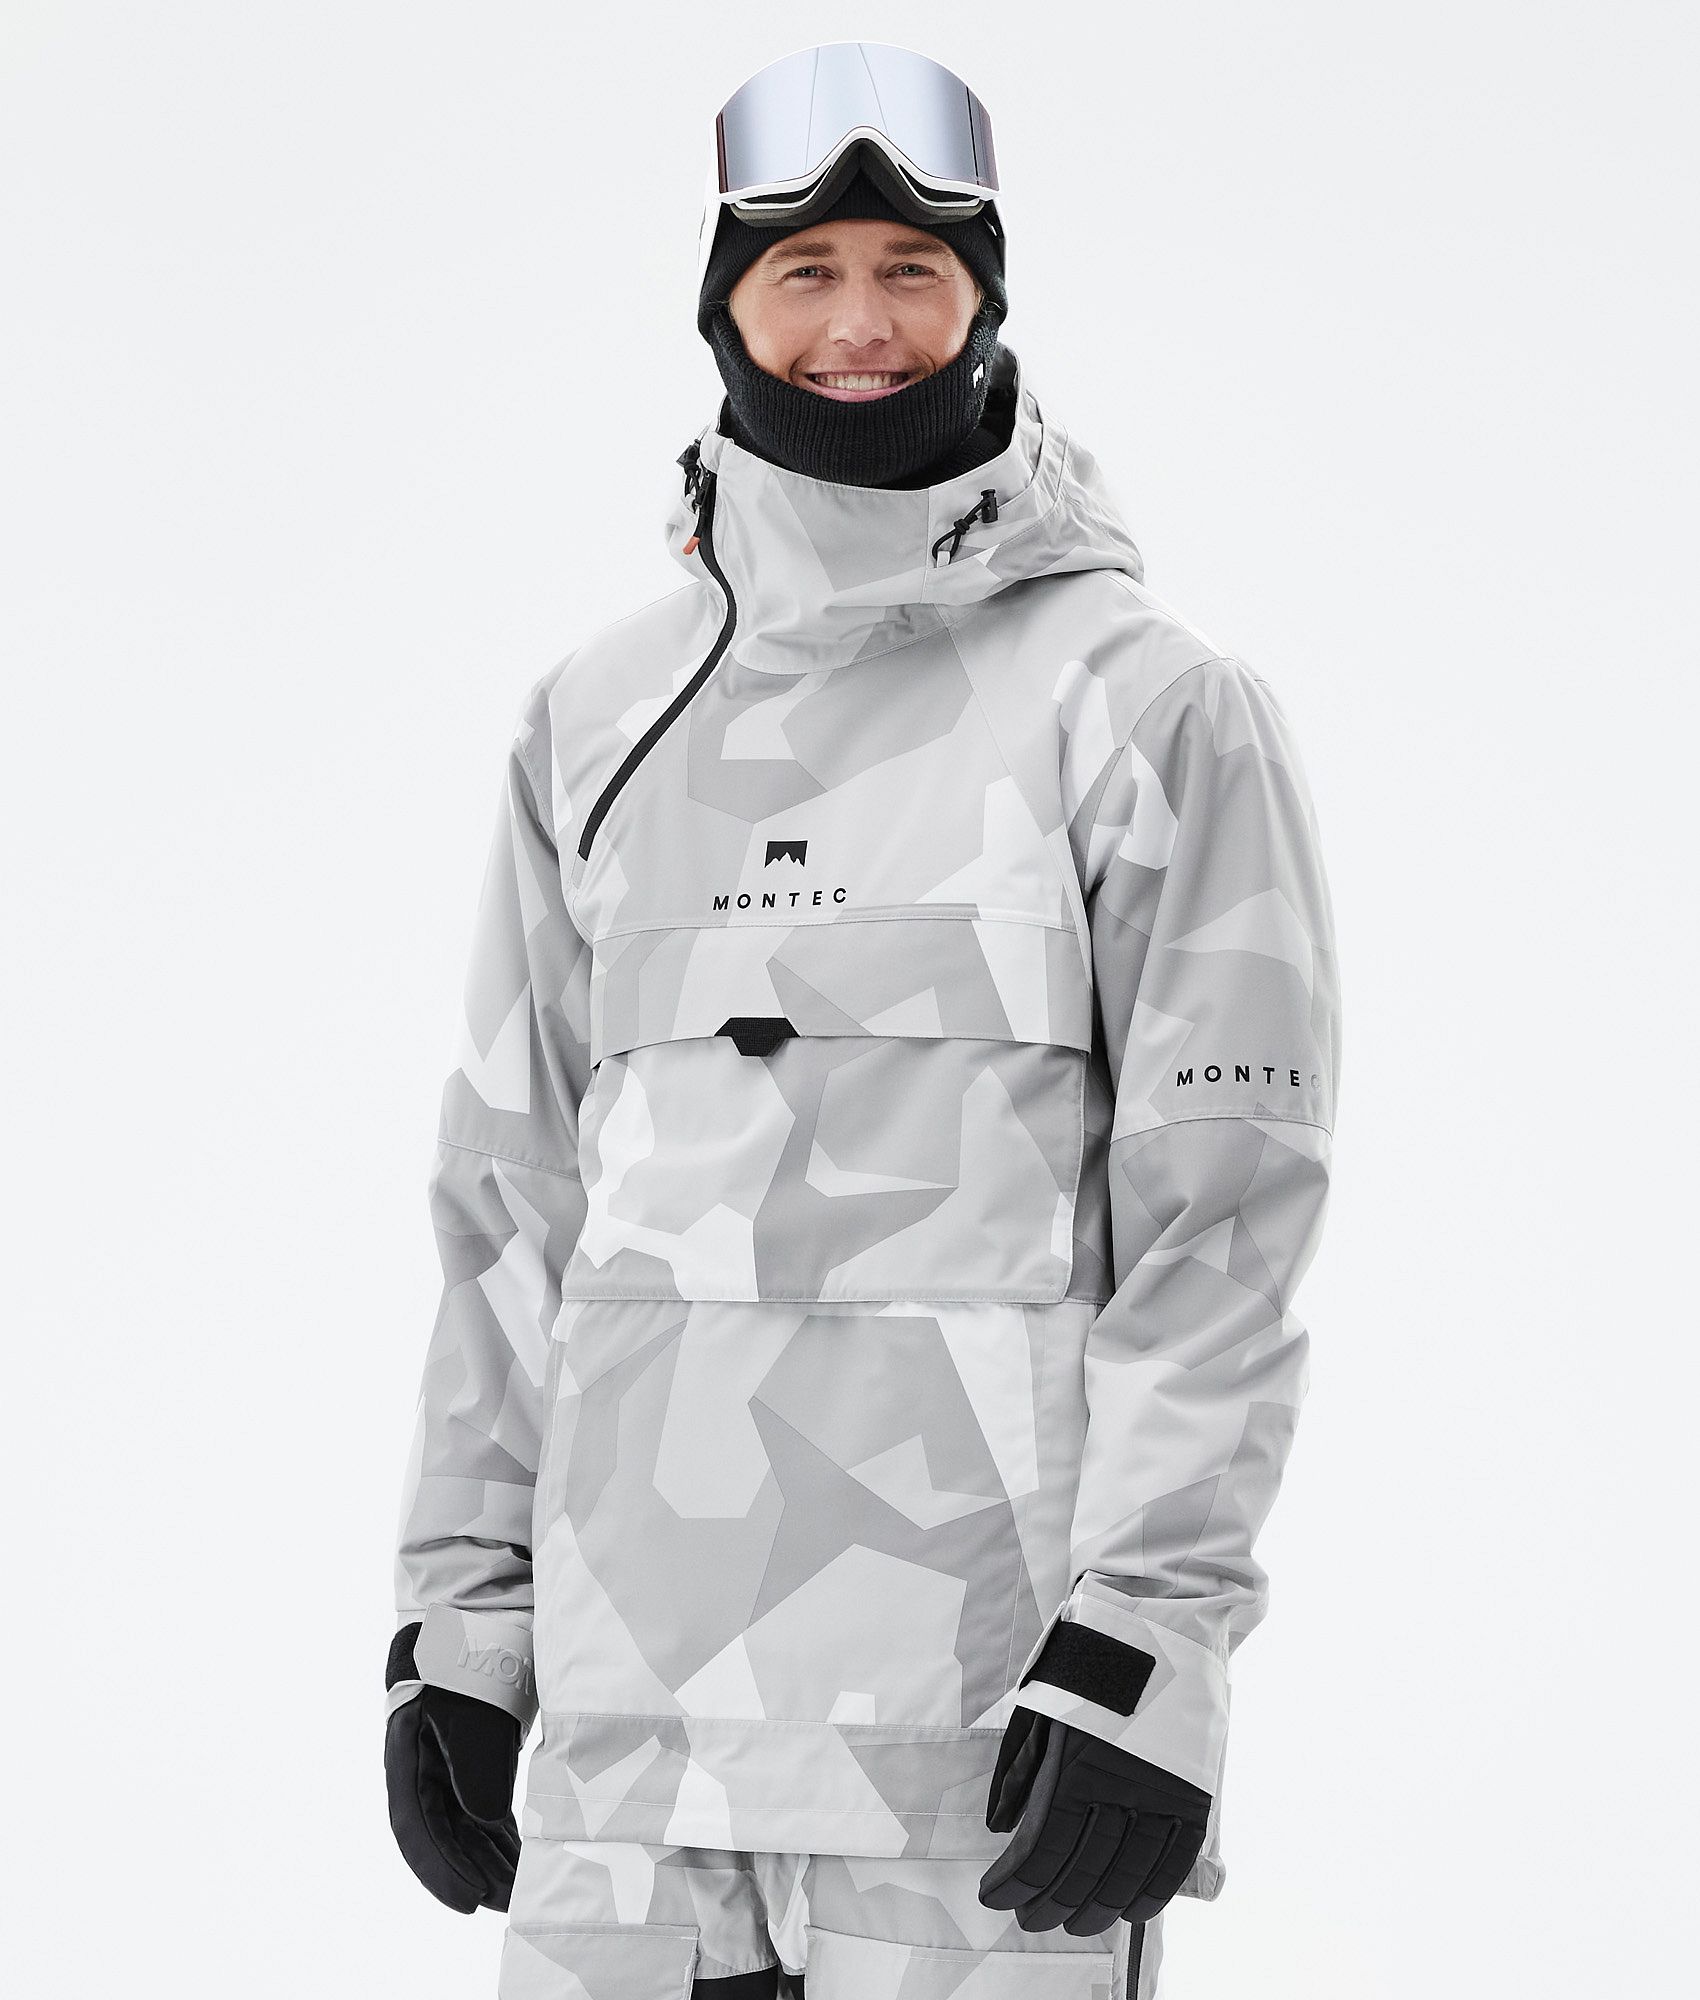 Mens Snowboard Clothing Free Delivery Montecwear